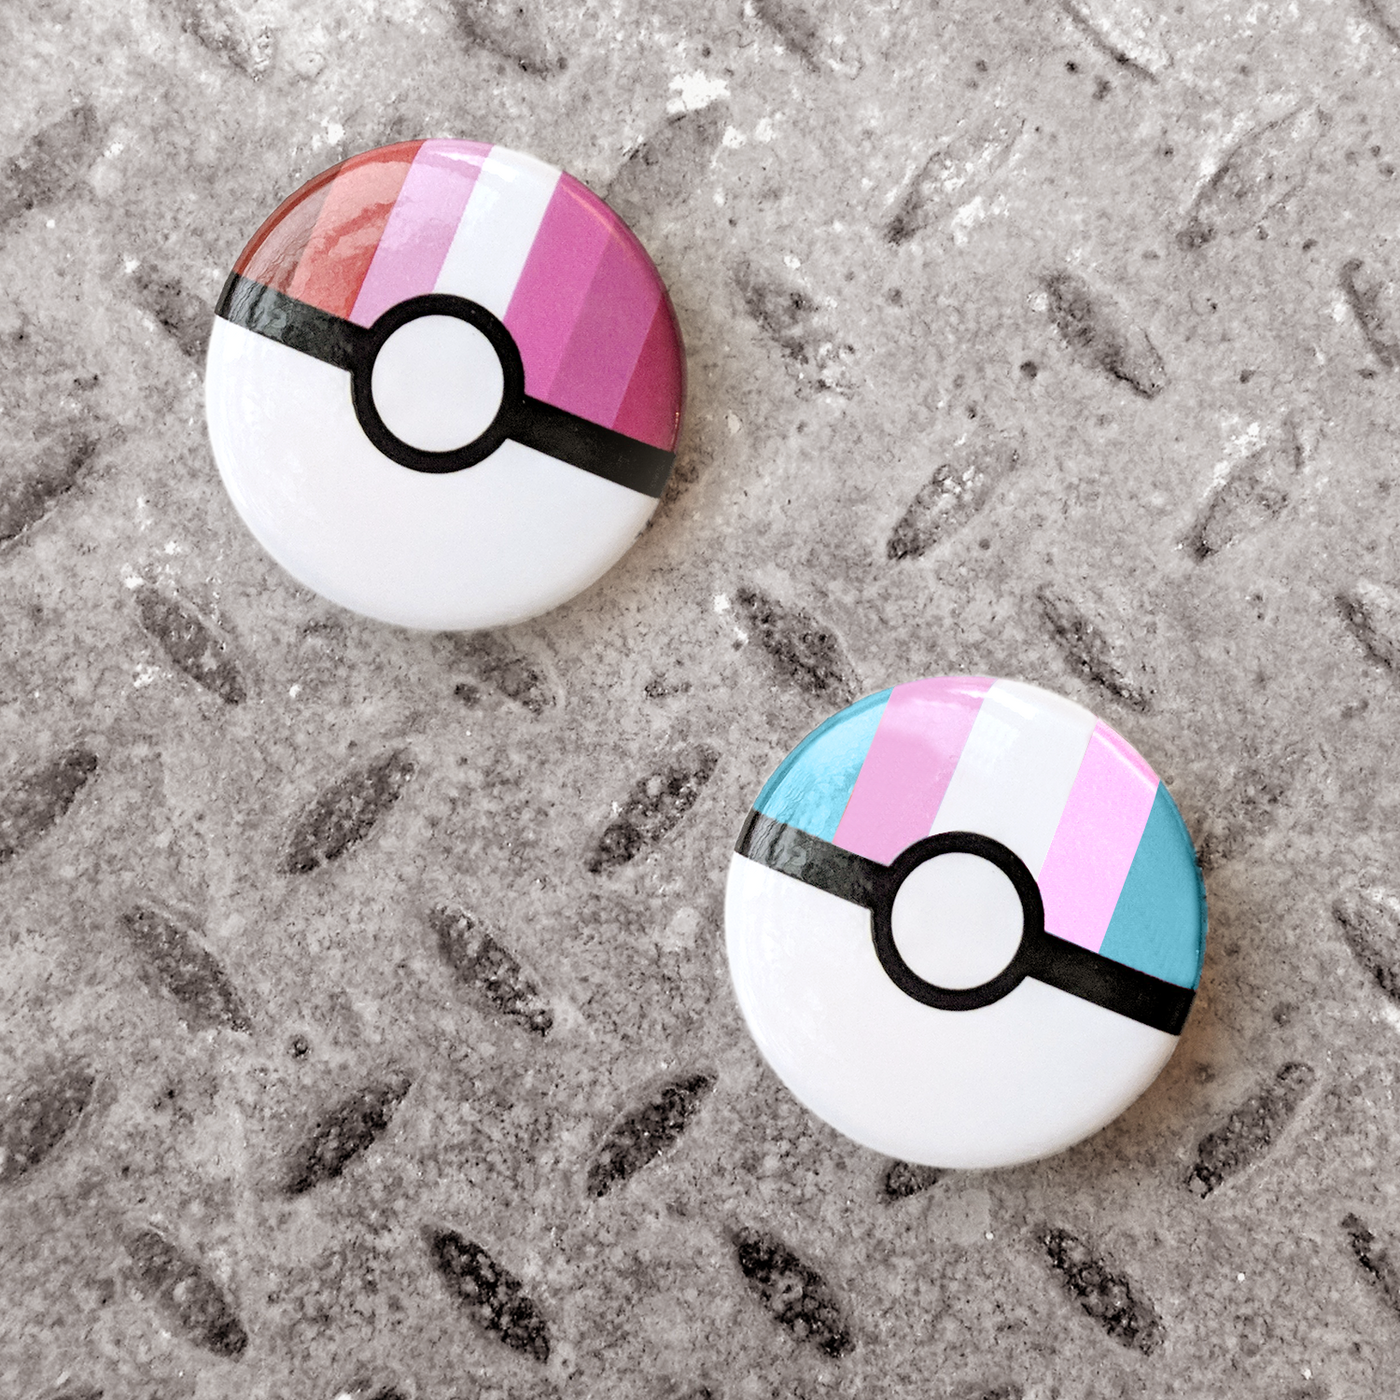 Two pins. Each is white on the bottom with a black horizontal stripe. The top half has vertical stripes in pride flag colors.